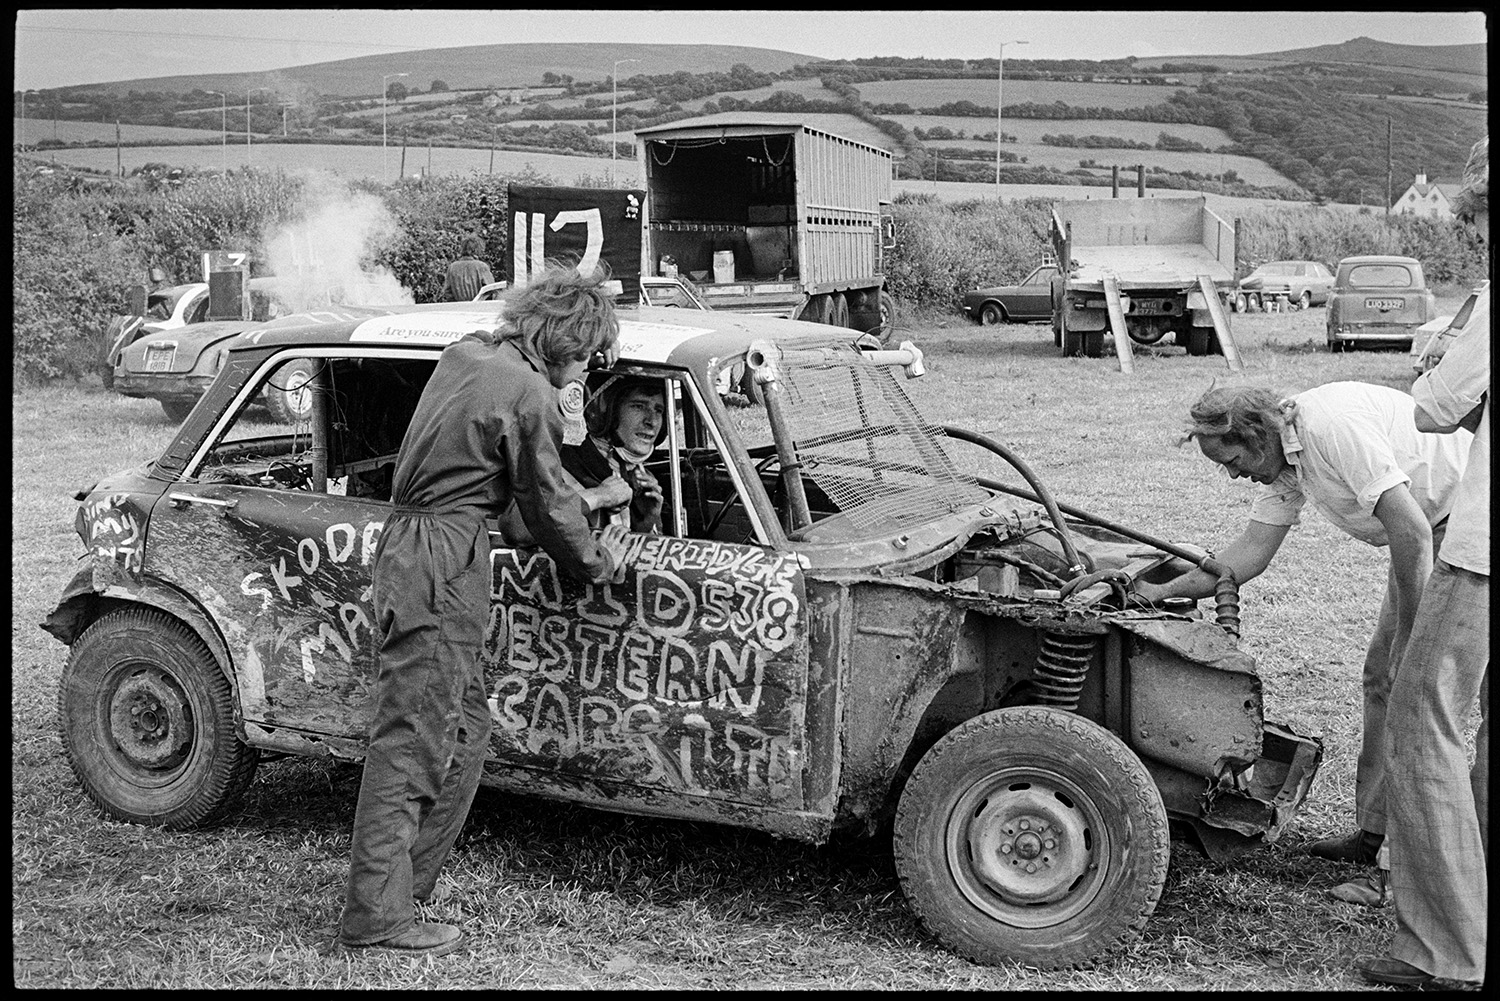 Cars, bangers at stock car race. 
[A man talking to a driver in a stock car at a banger race at Okehampton. Another man is looking at the engine of the car. Other parked cars and lorries can be seen in the background.]